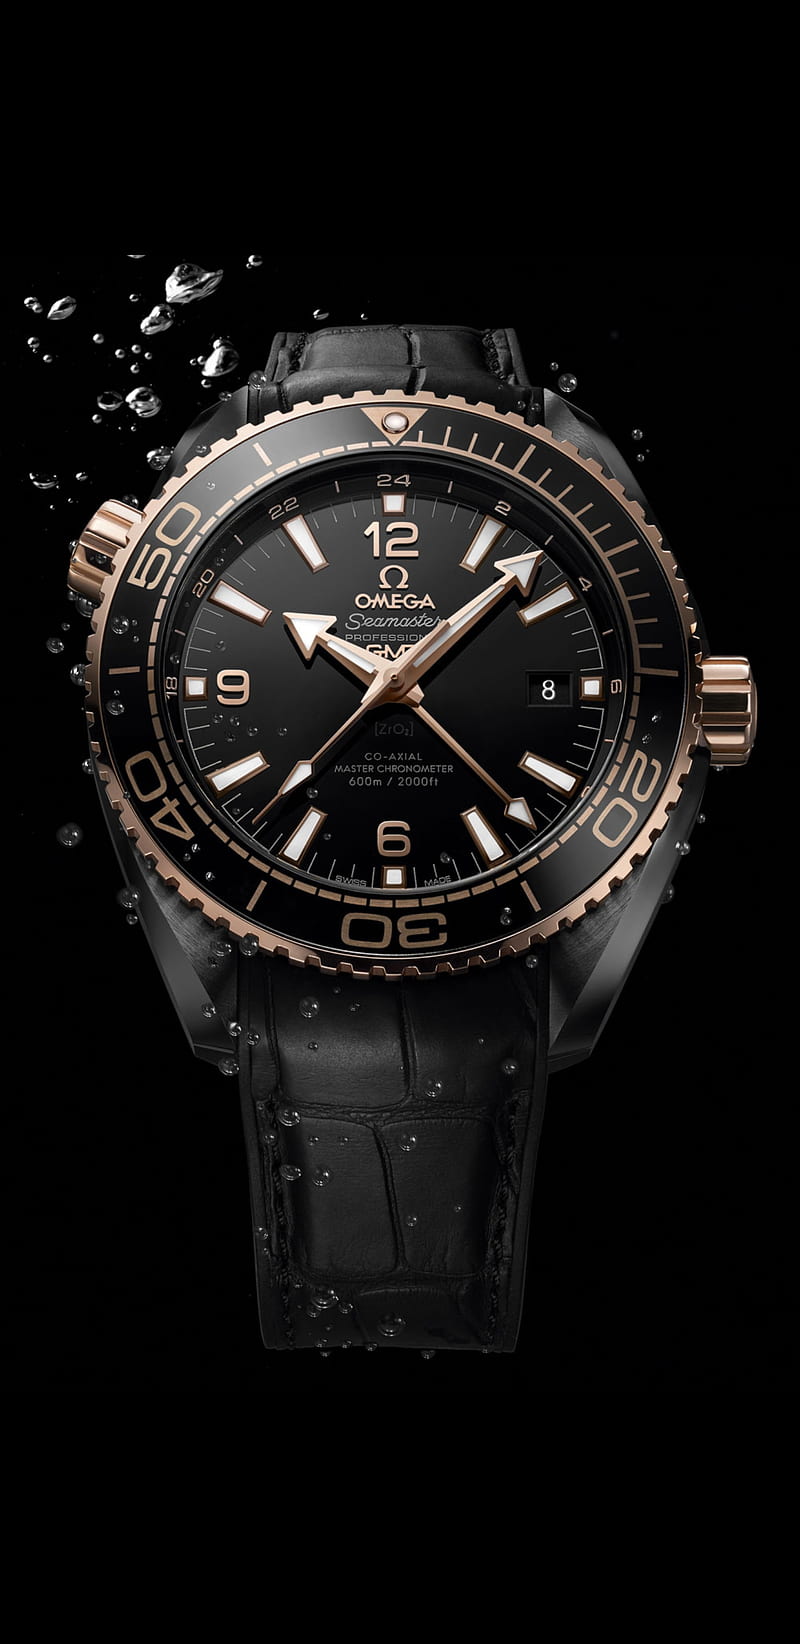 OMEGA SEAMASTER, diving, watches, watch, luxury, HD phone wallpaper